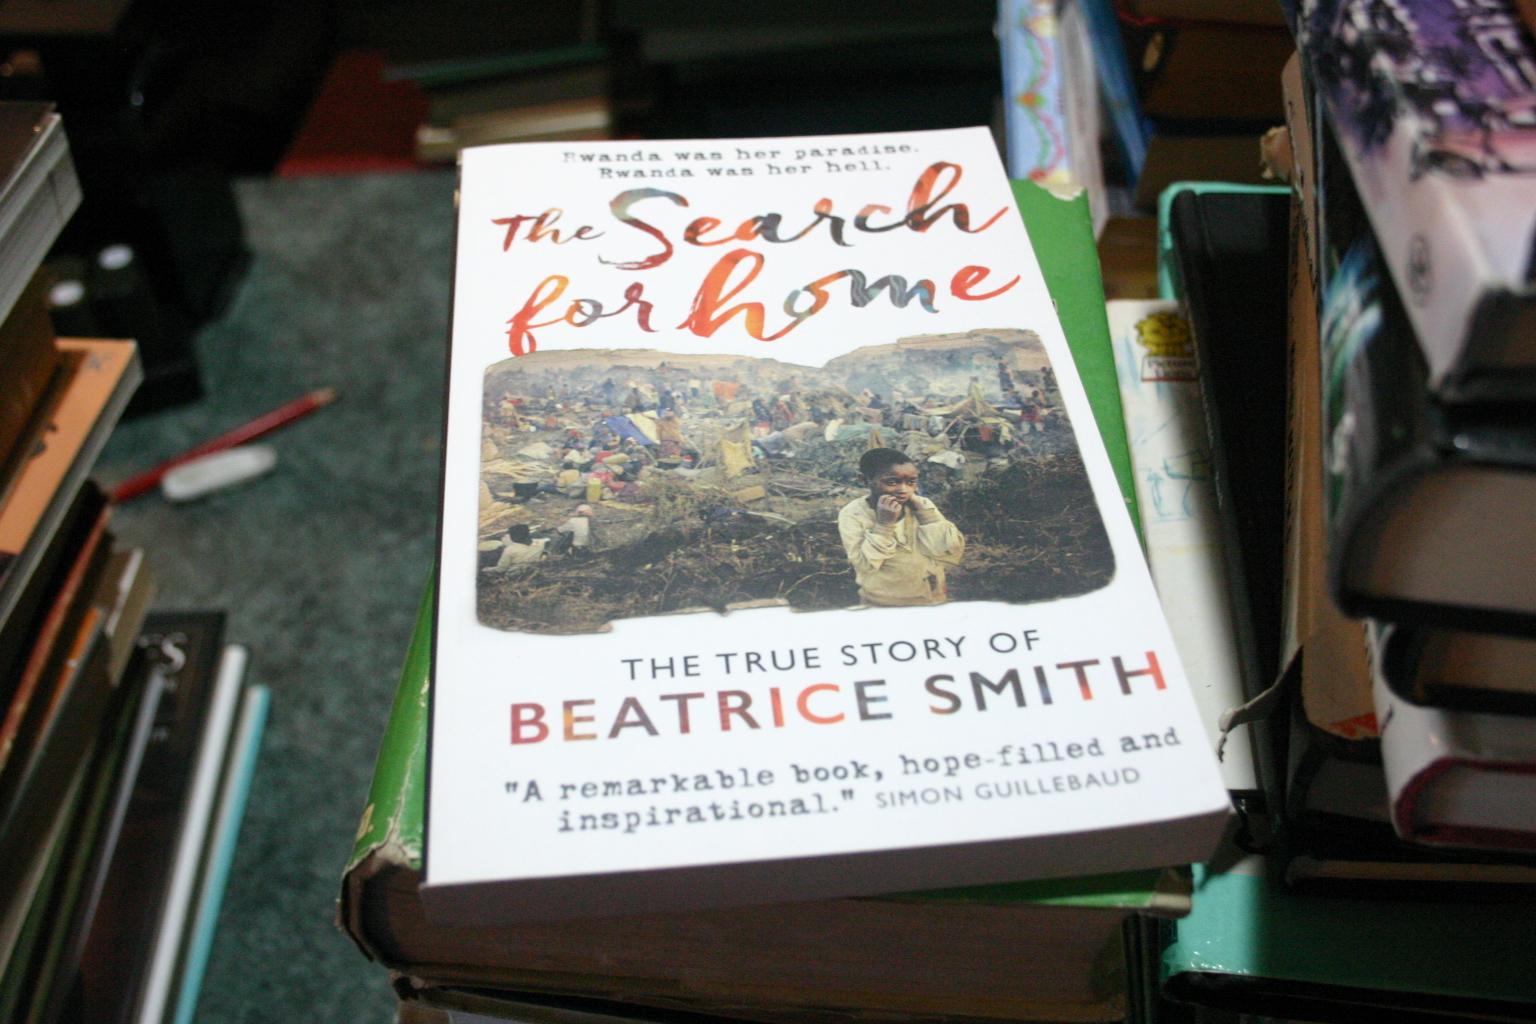 The Search for Home: Rwanda was her paradise. Rwanda was her hell. - Beatrice Smith